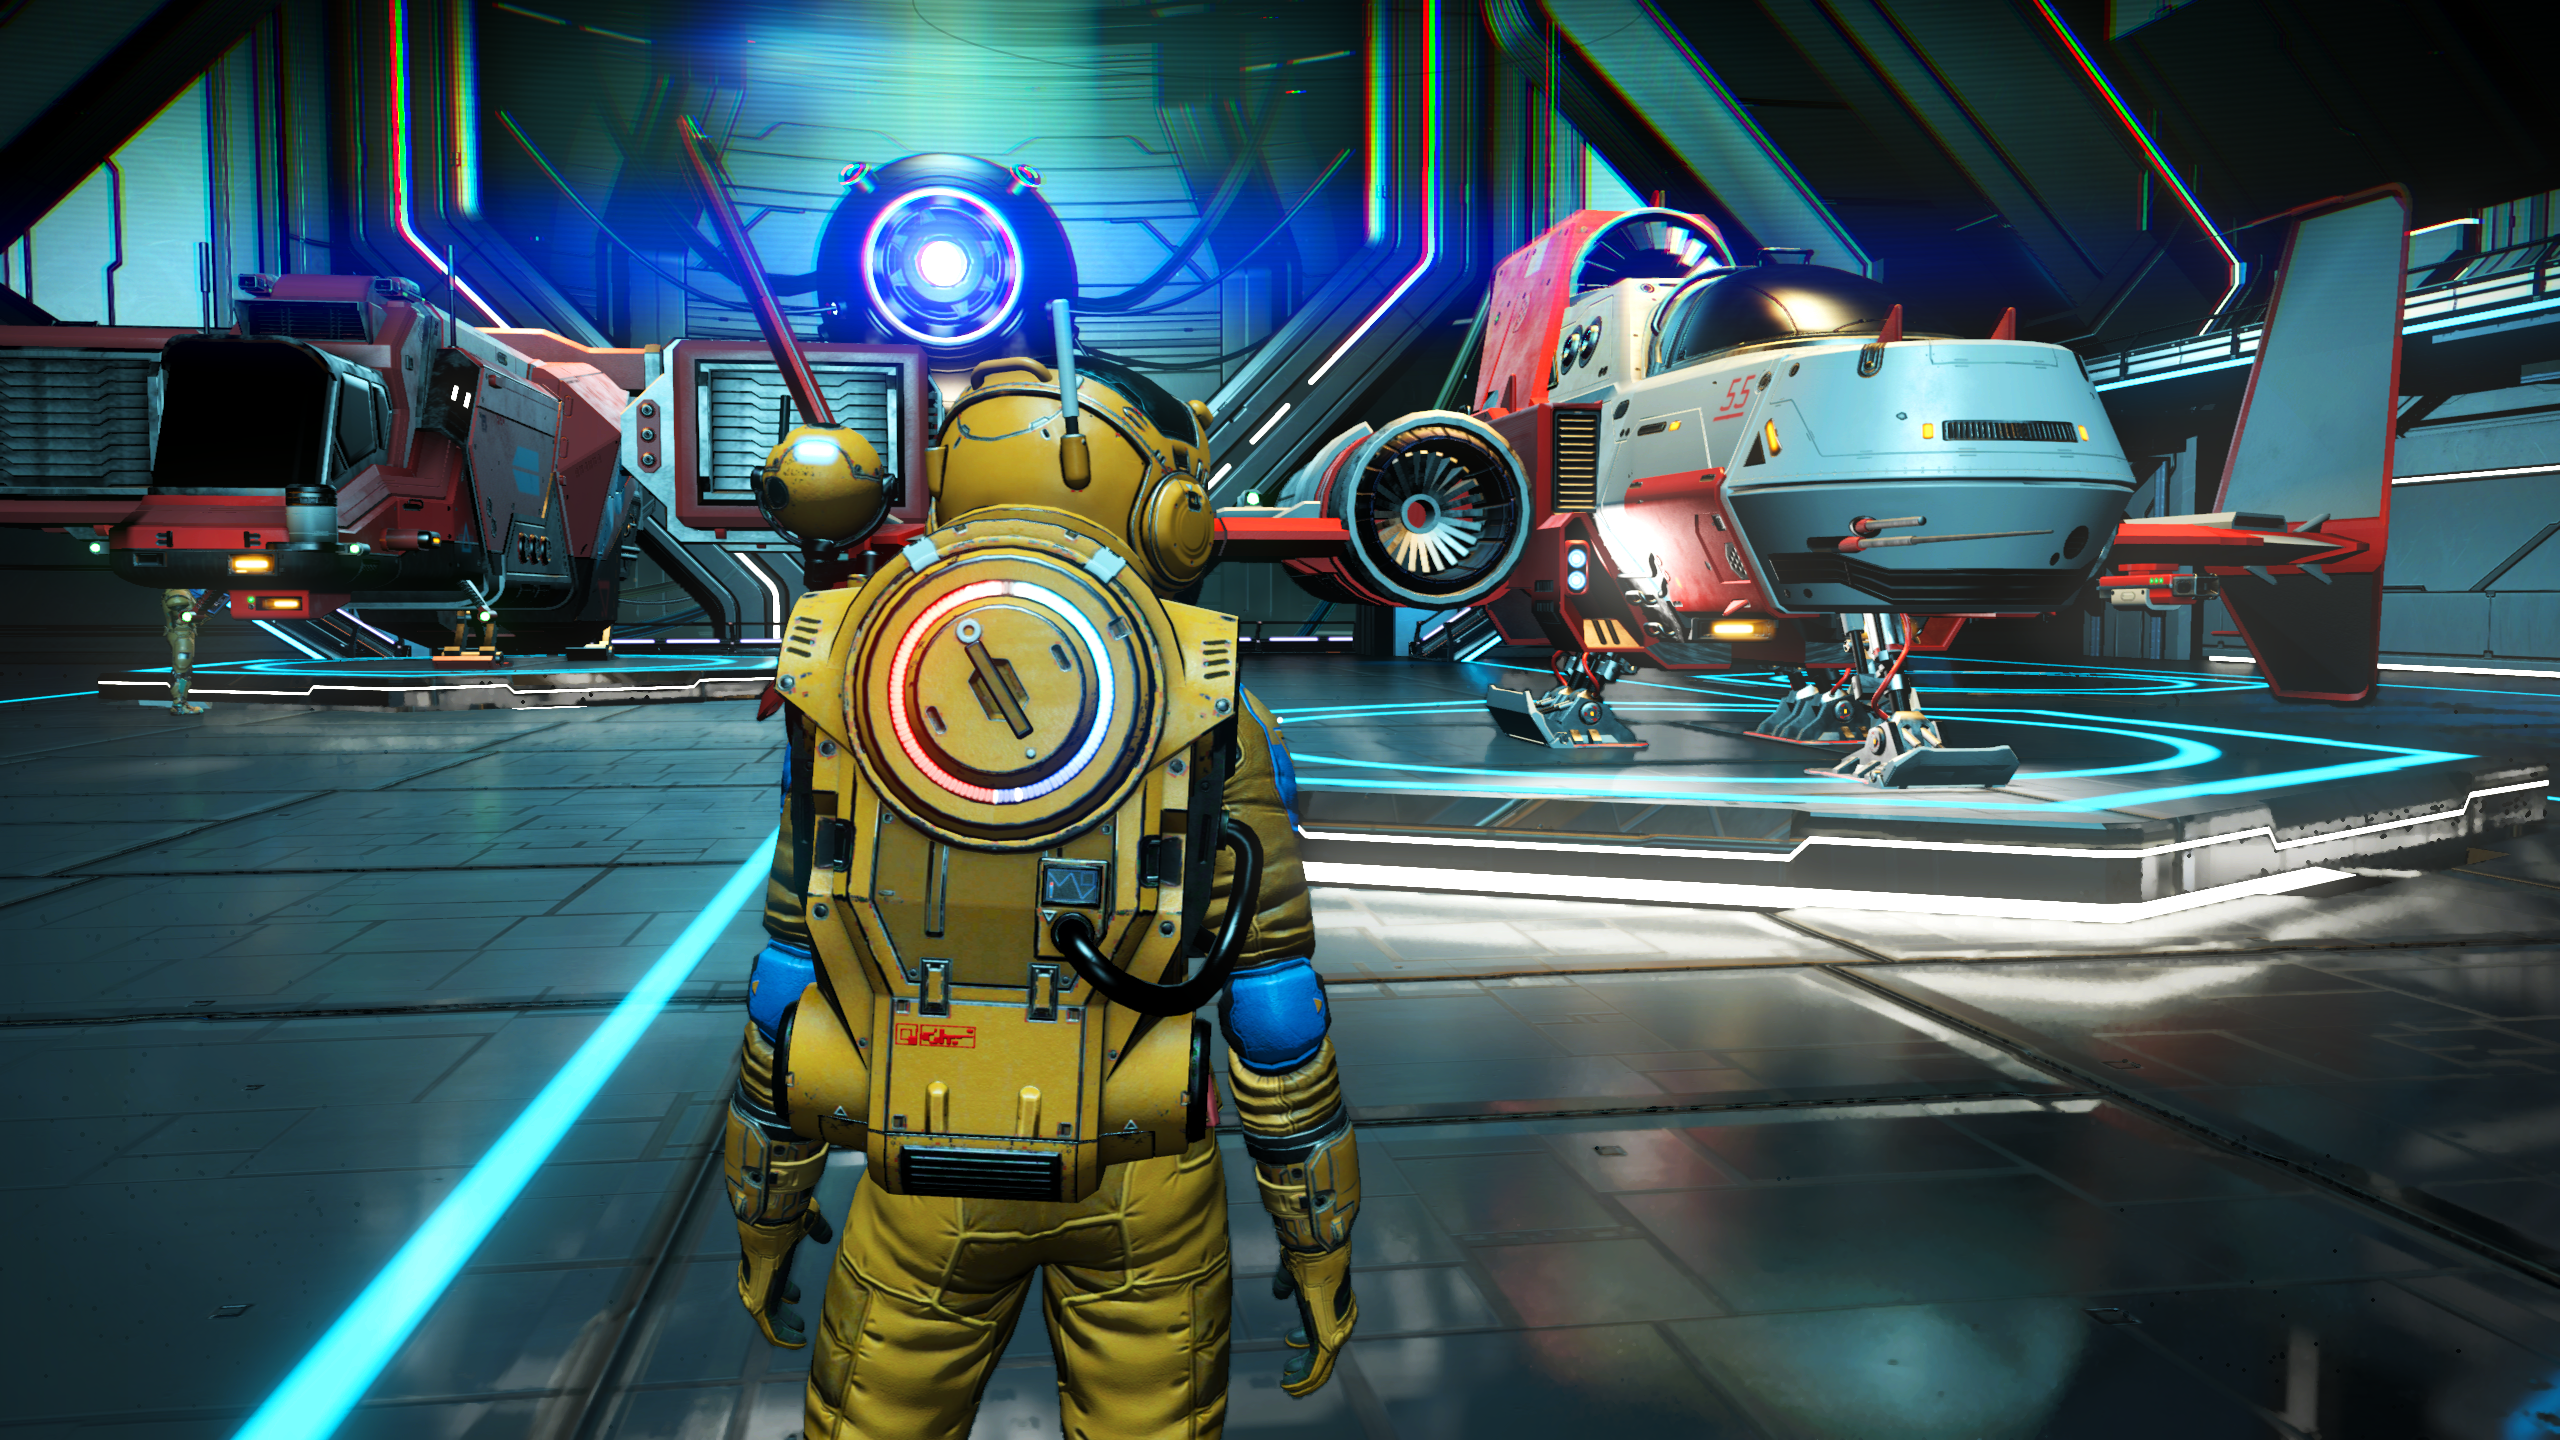 TAA used in No Man's Sky. A spaceman stands in front of some spaceships within a hangar.